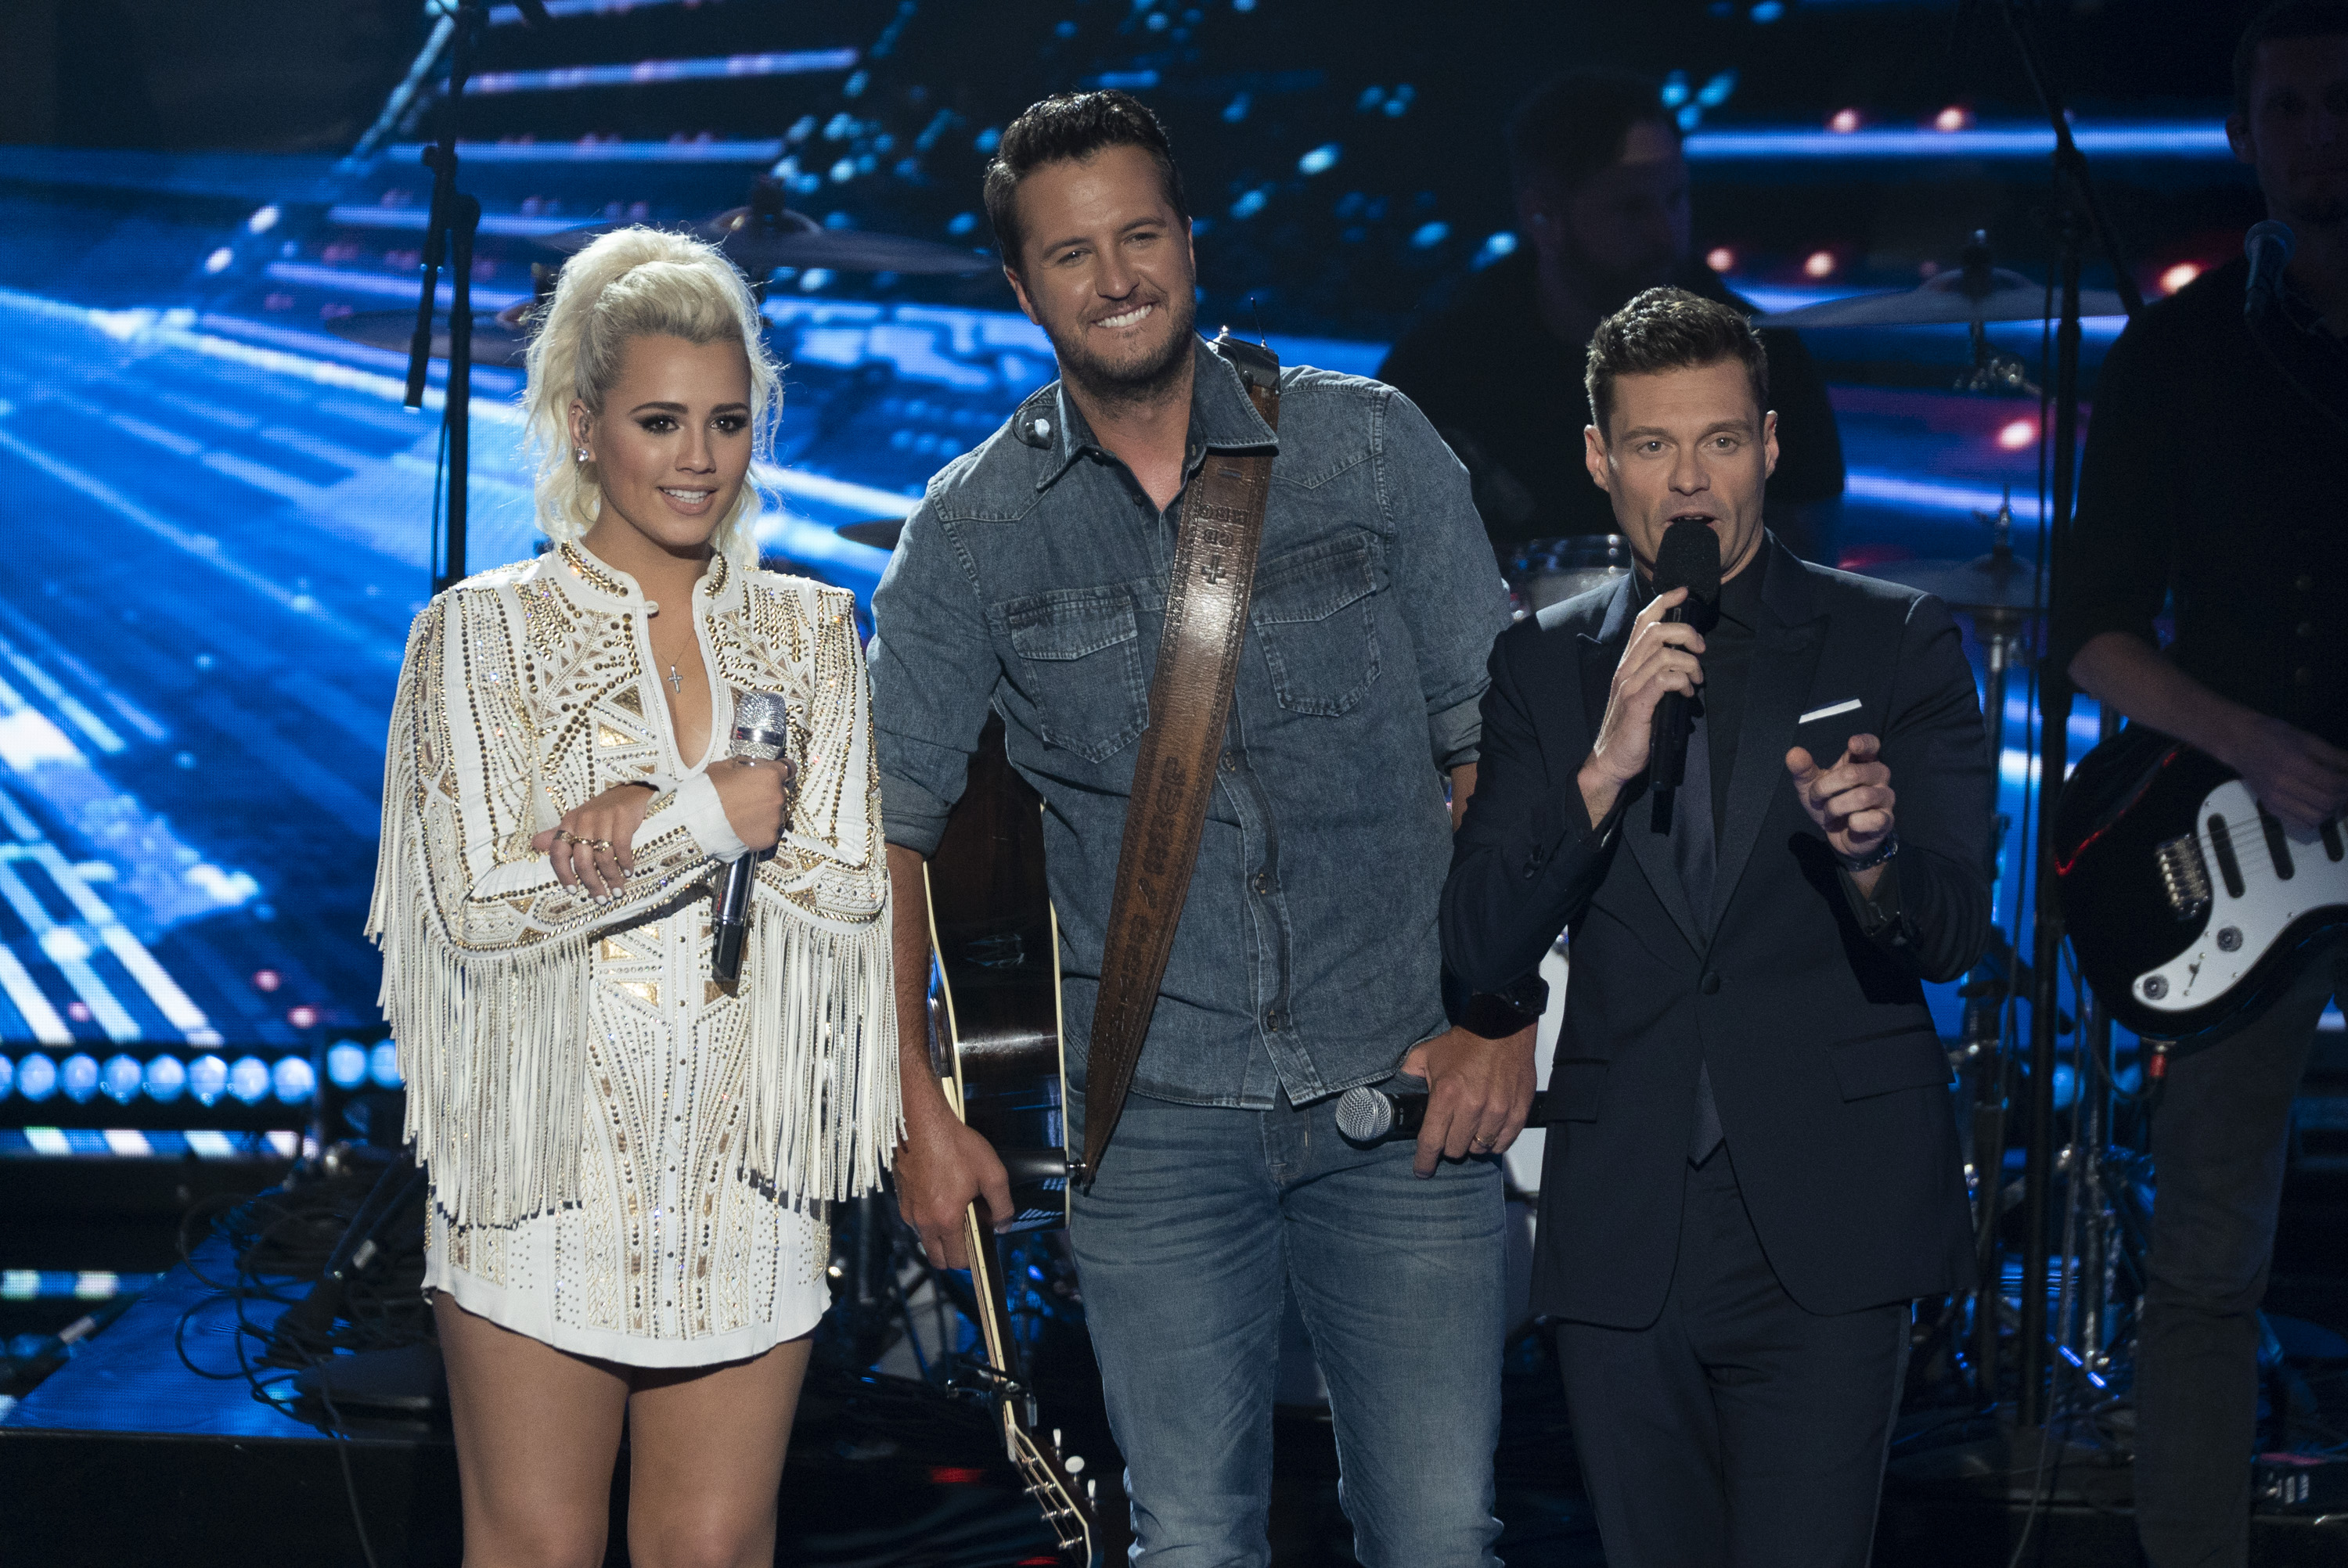 Gabby Barrett, Luke Bryan, and Ryan Seacrest on the American Idol finale which aired on ABC on May 21, 2018.
Photo credit: American Idol
